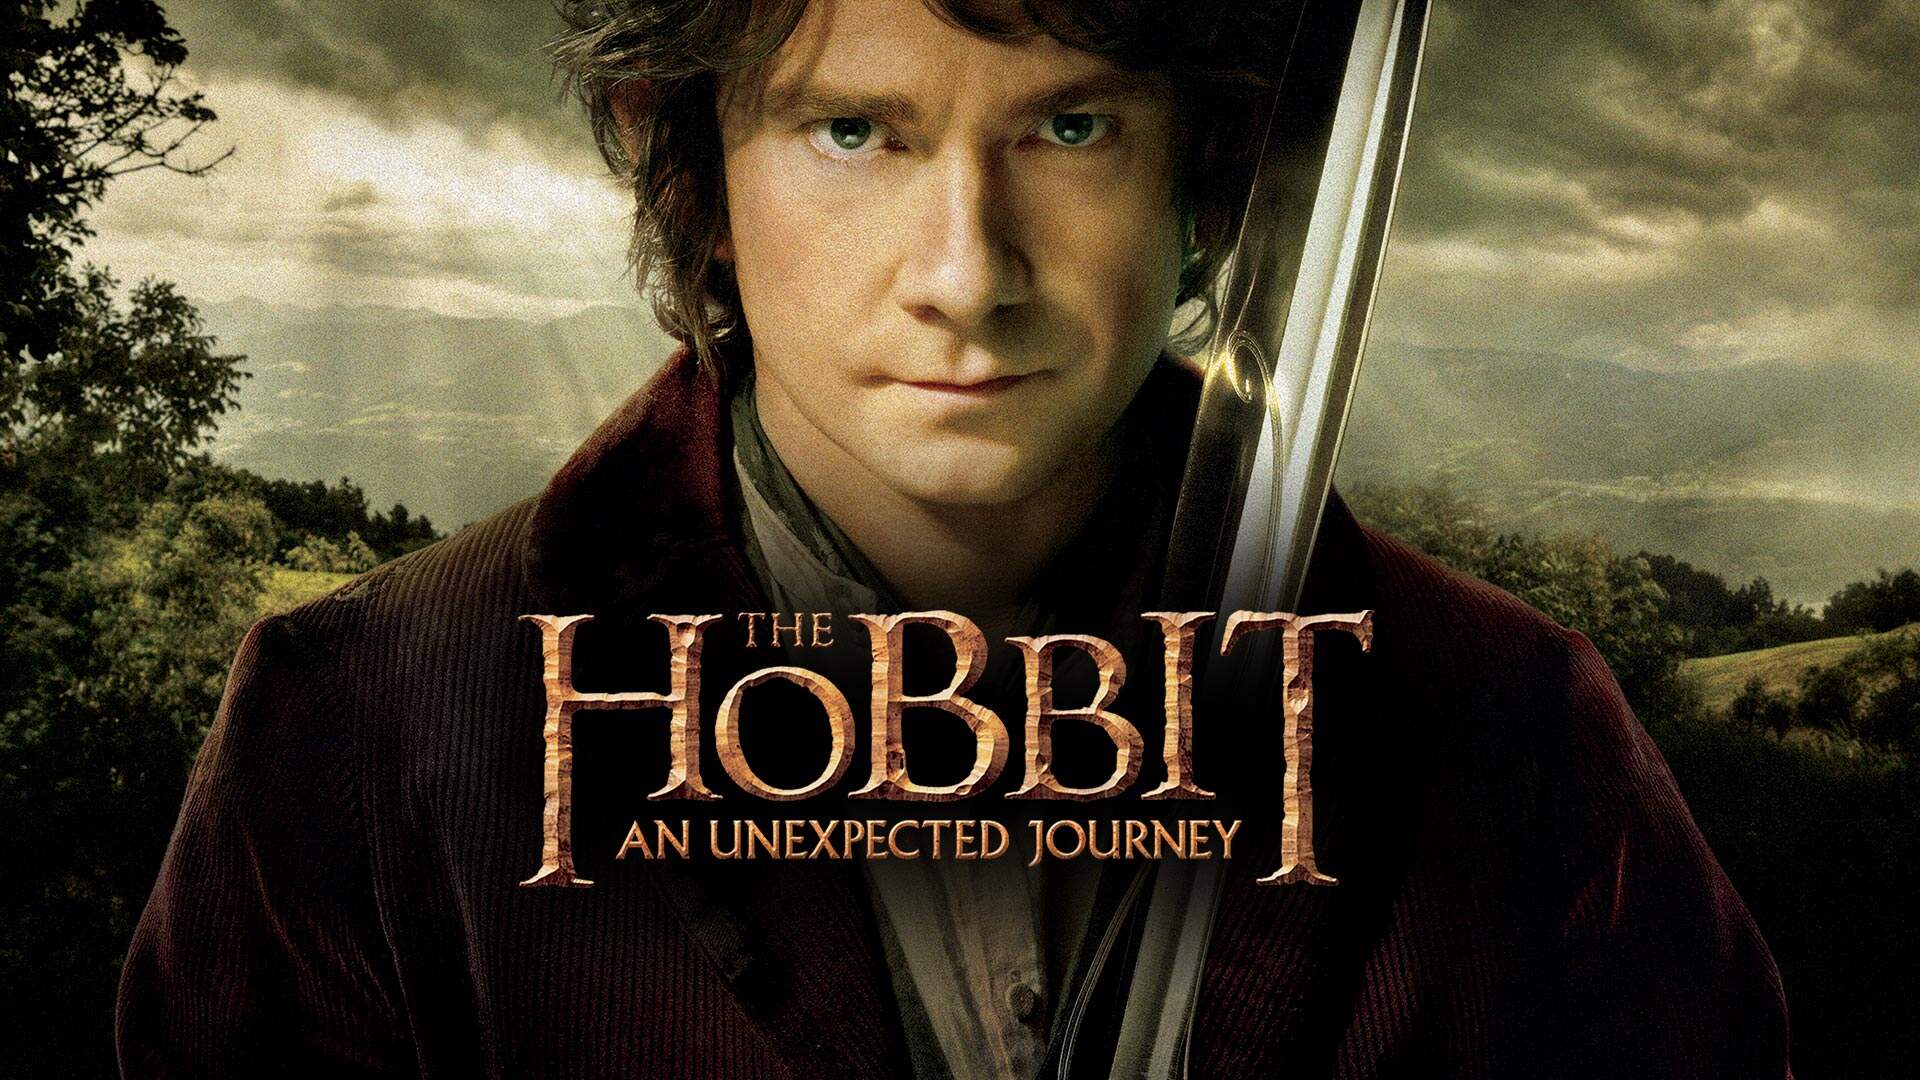 34-facts-about-the-movie-the-hobbit